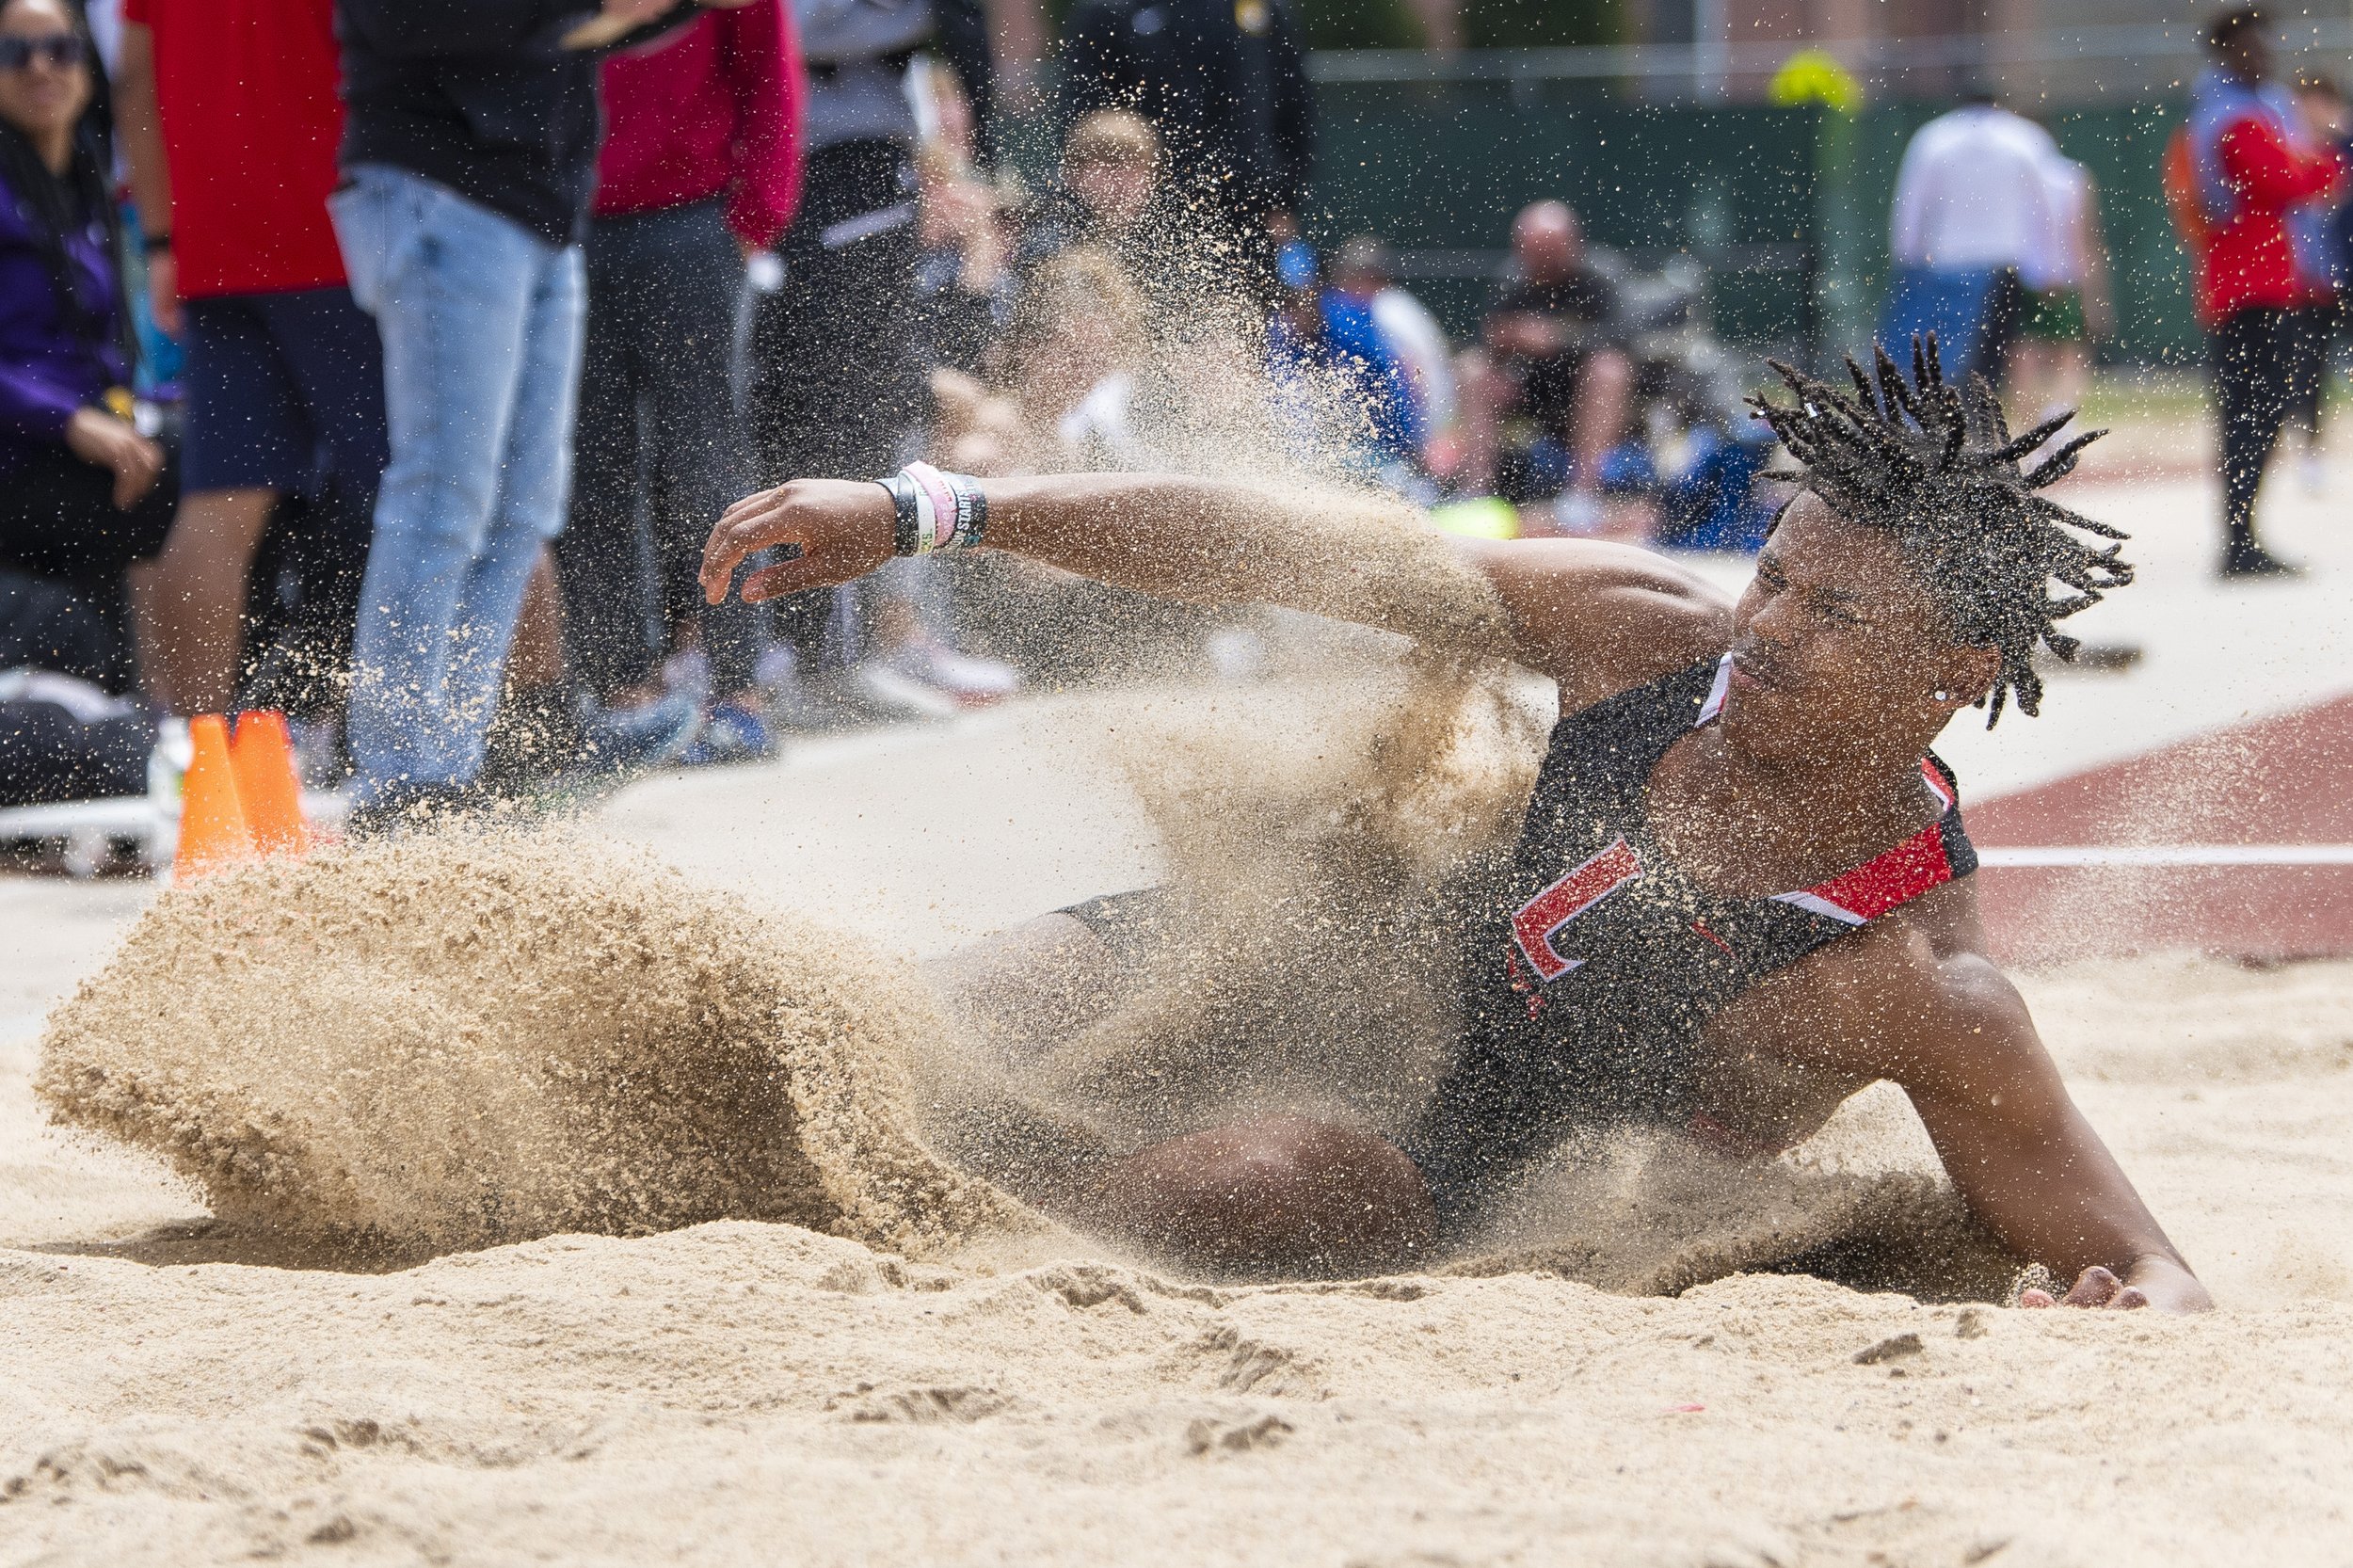  Lincoln High's Adonis Hutchinson lands in the sand pit after being called for a foul  while competing in the boys long jump the at Beechner Athletic Complex on April 21, 2022, in Lincoln, Nebraska. KENNETH FERRIERA, Journal Star       